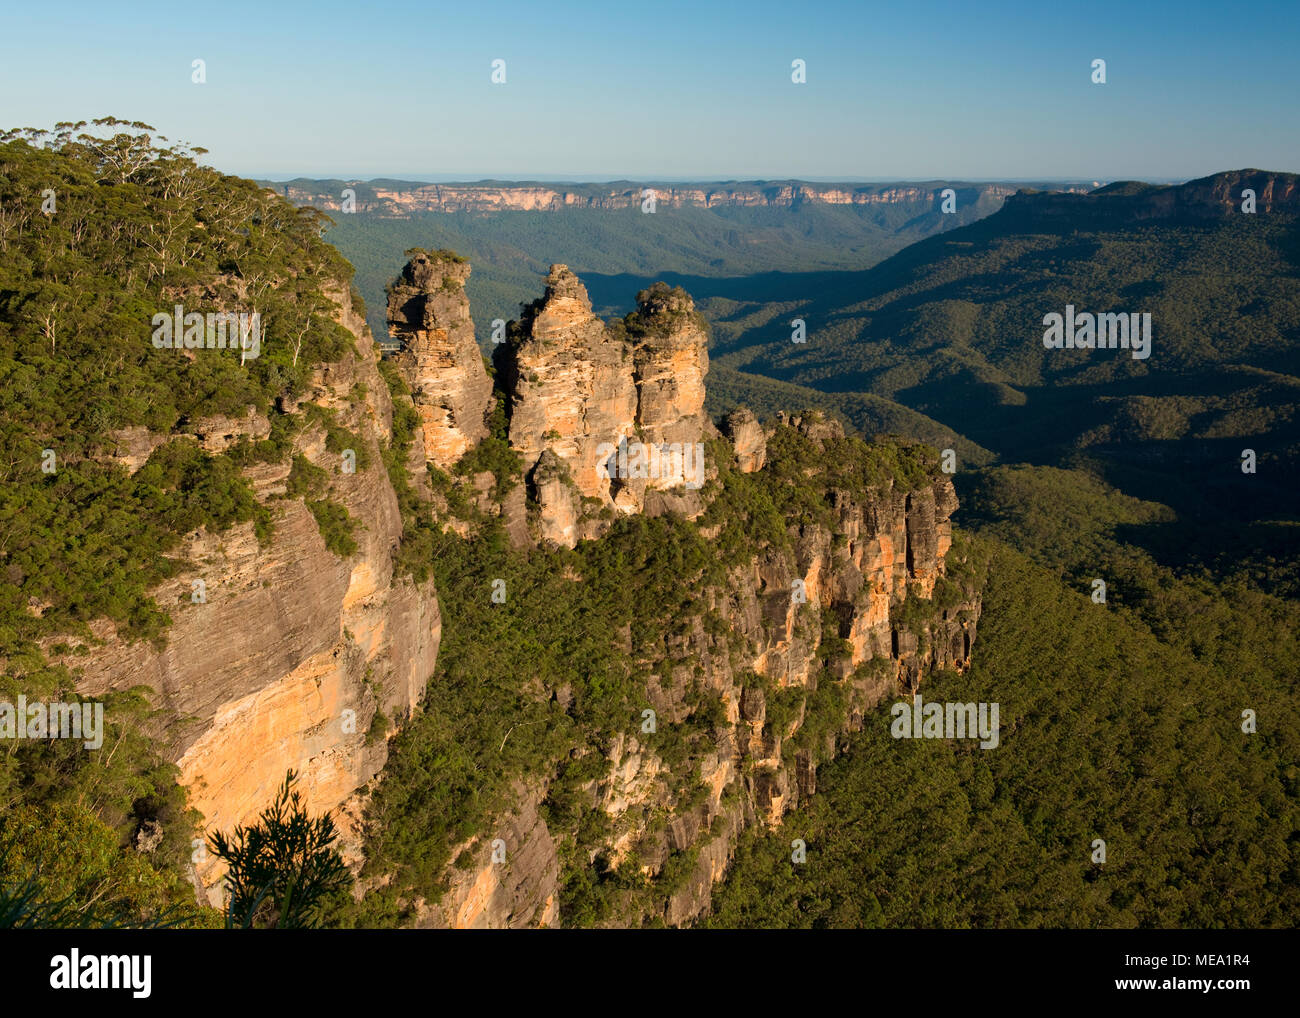 Sun setting on The Three Sisters rock pinnacles. Blue Mountains National Park Stock Photo